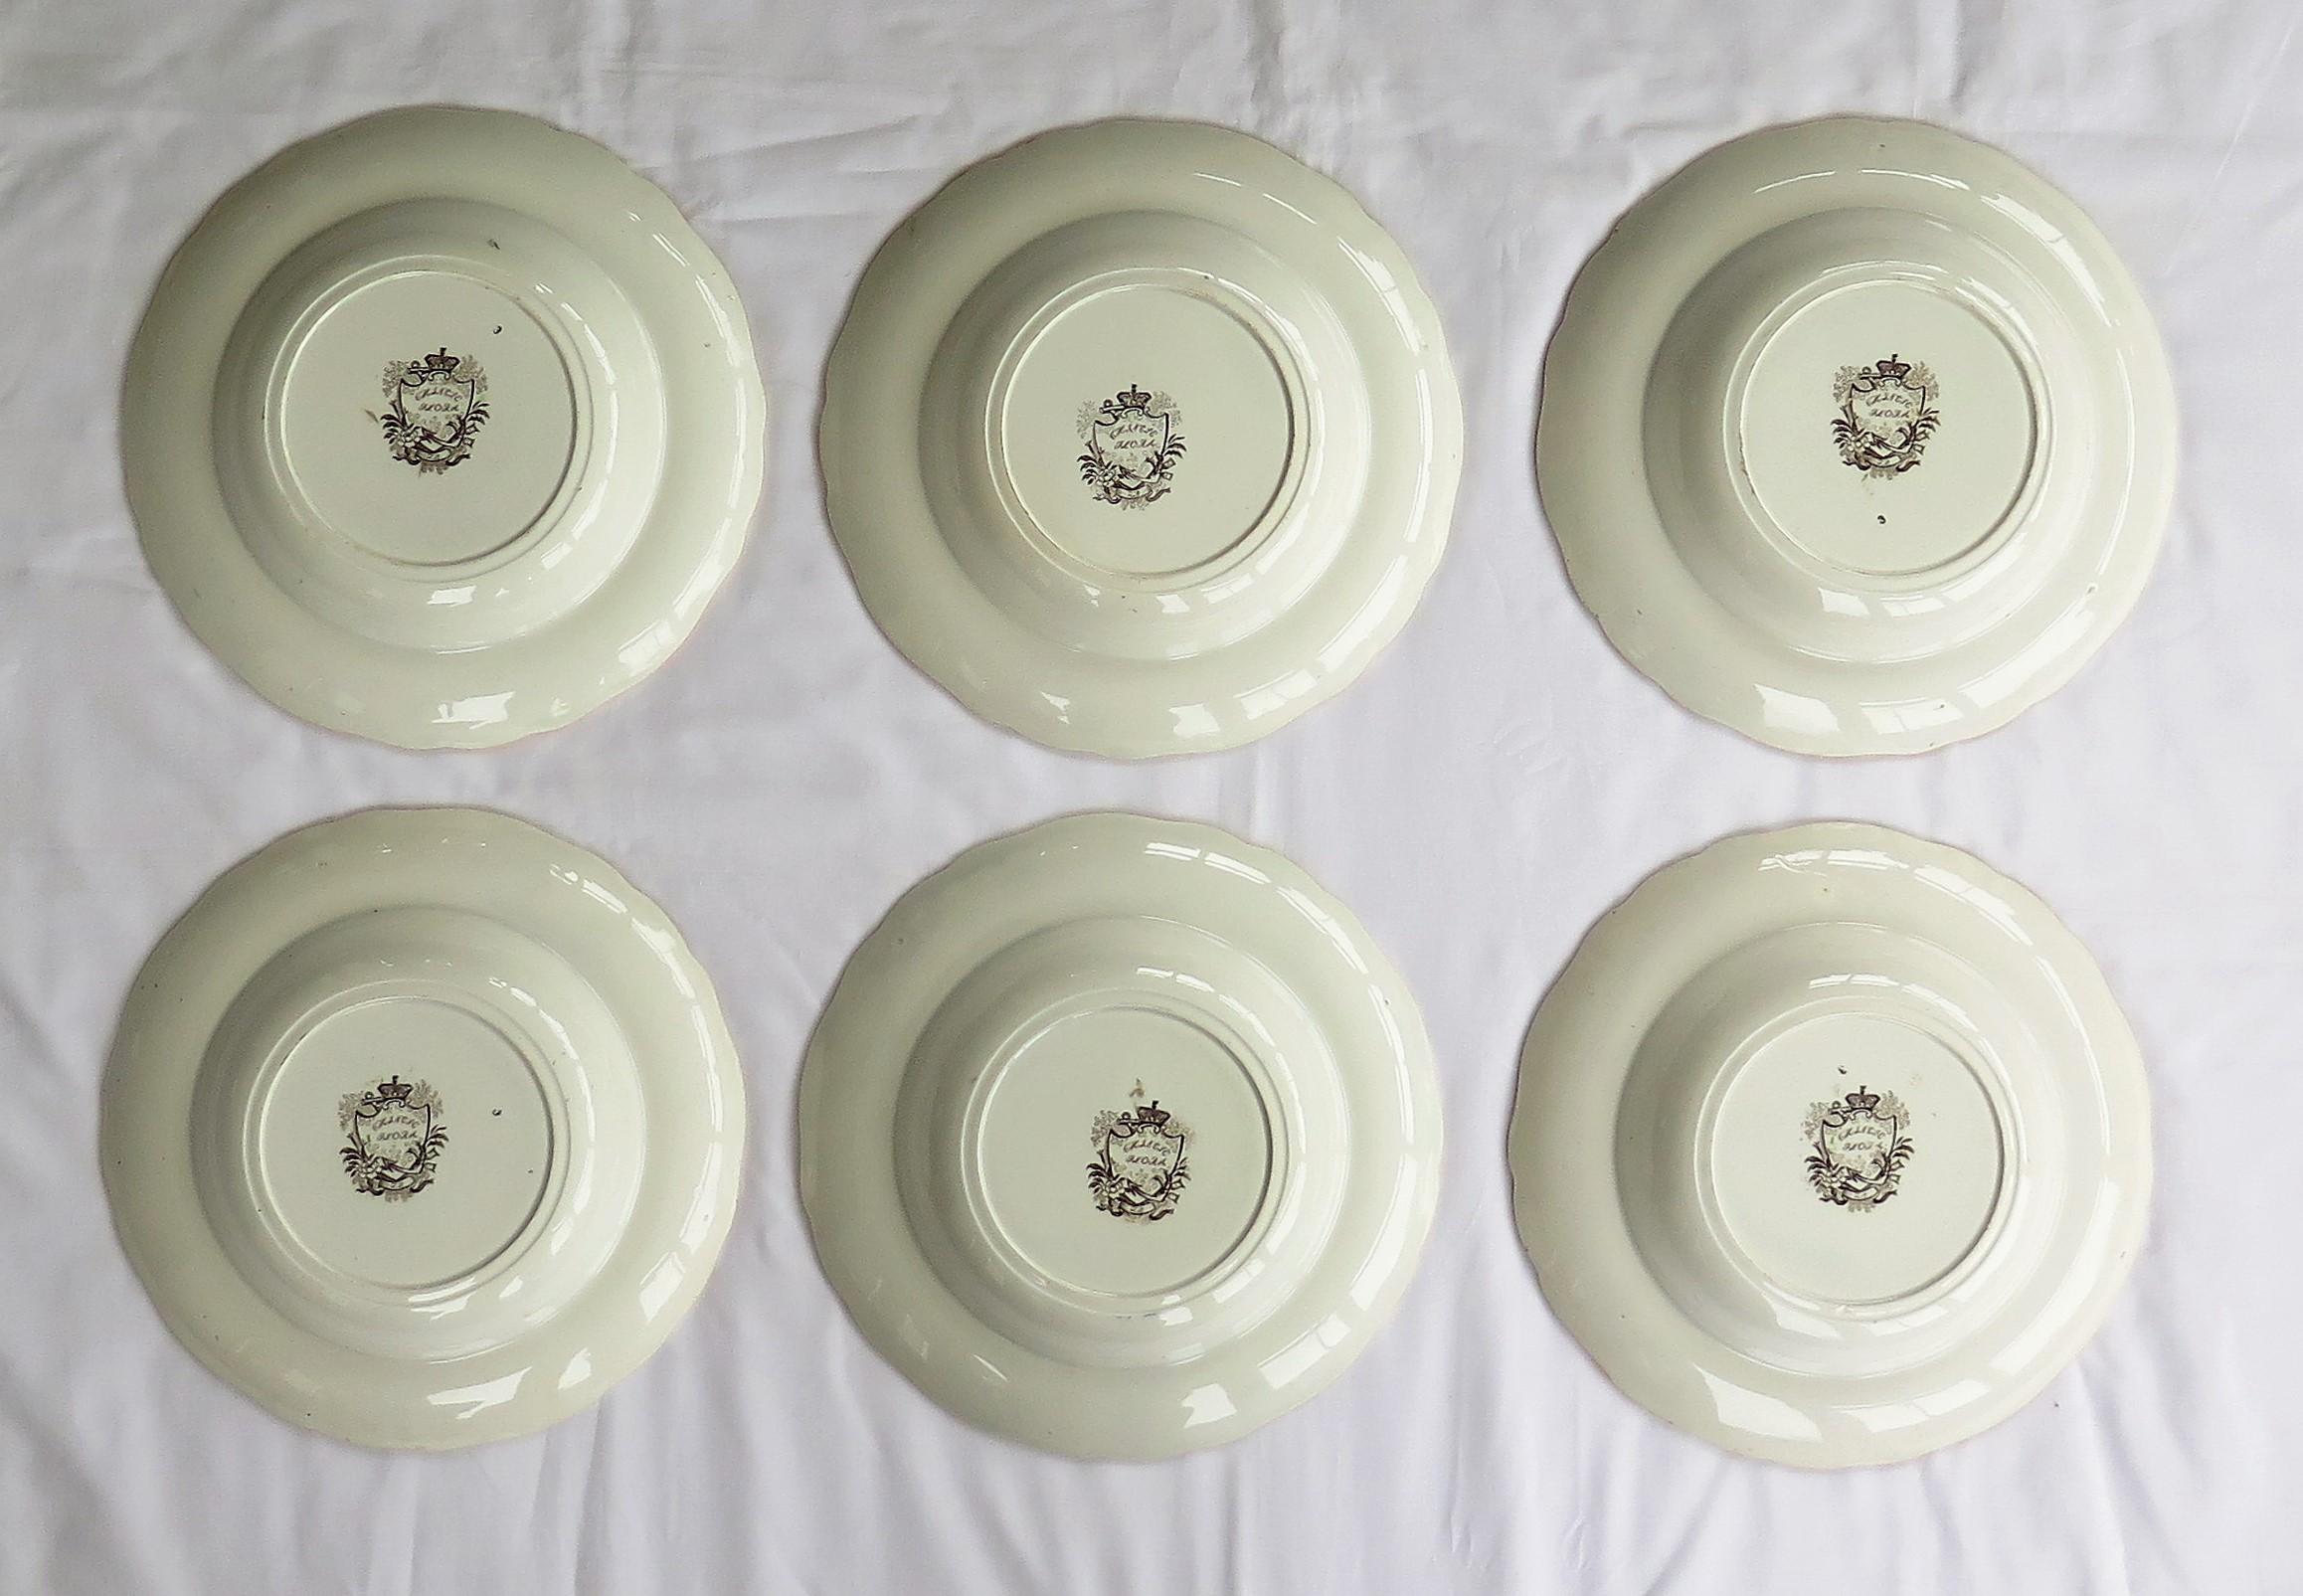 SIX Pottery Soup Bowls or Plates by Zachariah Boyle Chinese Flora Pattern 3